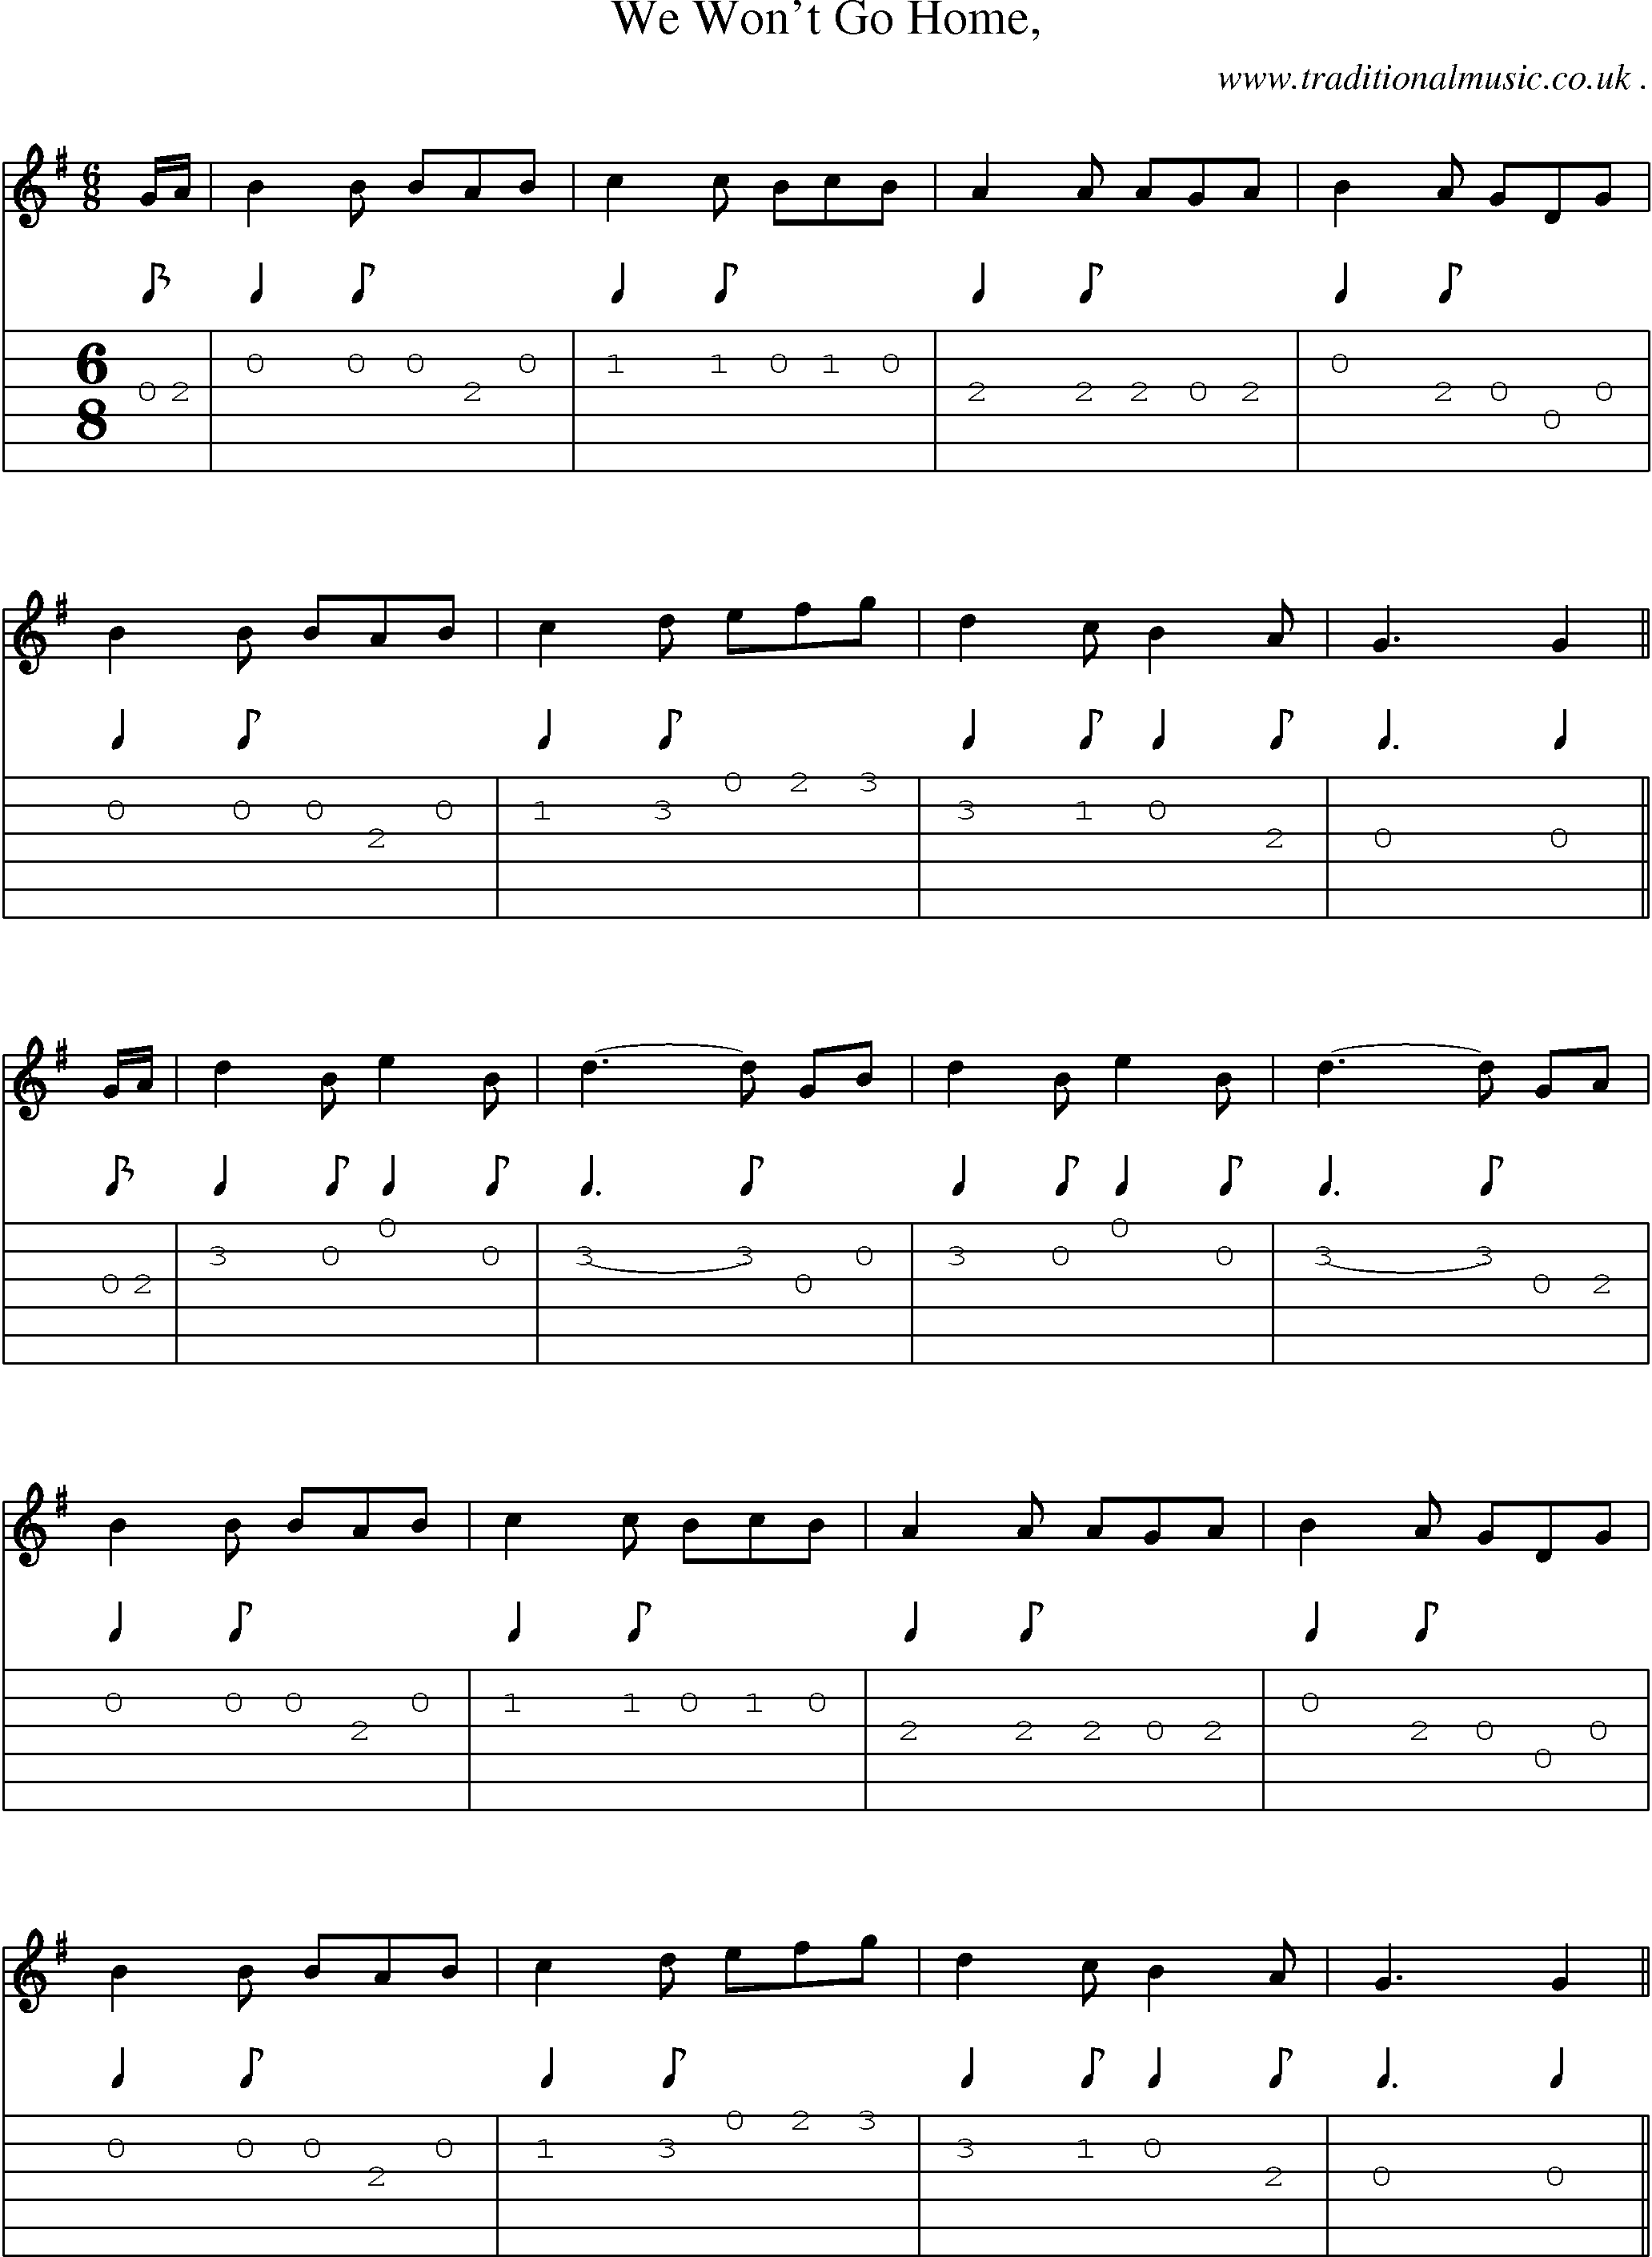 Sheet-Music and Guitar Tabs for We Wont Go Home